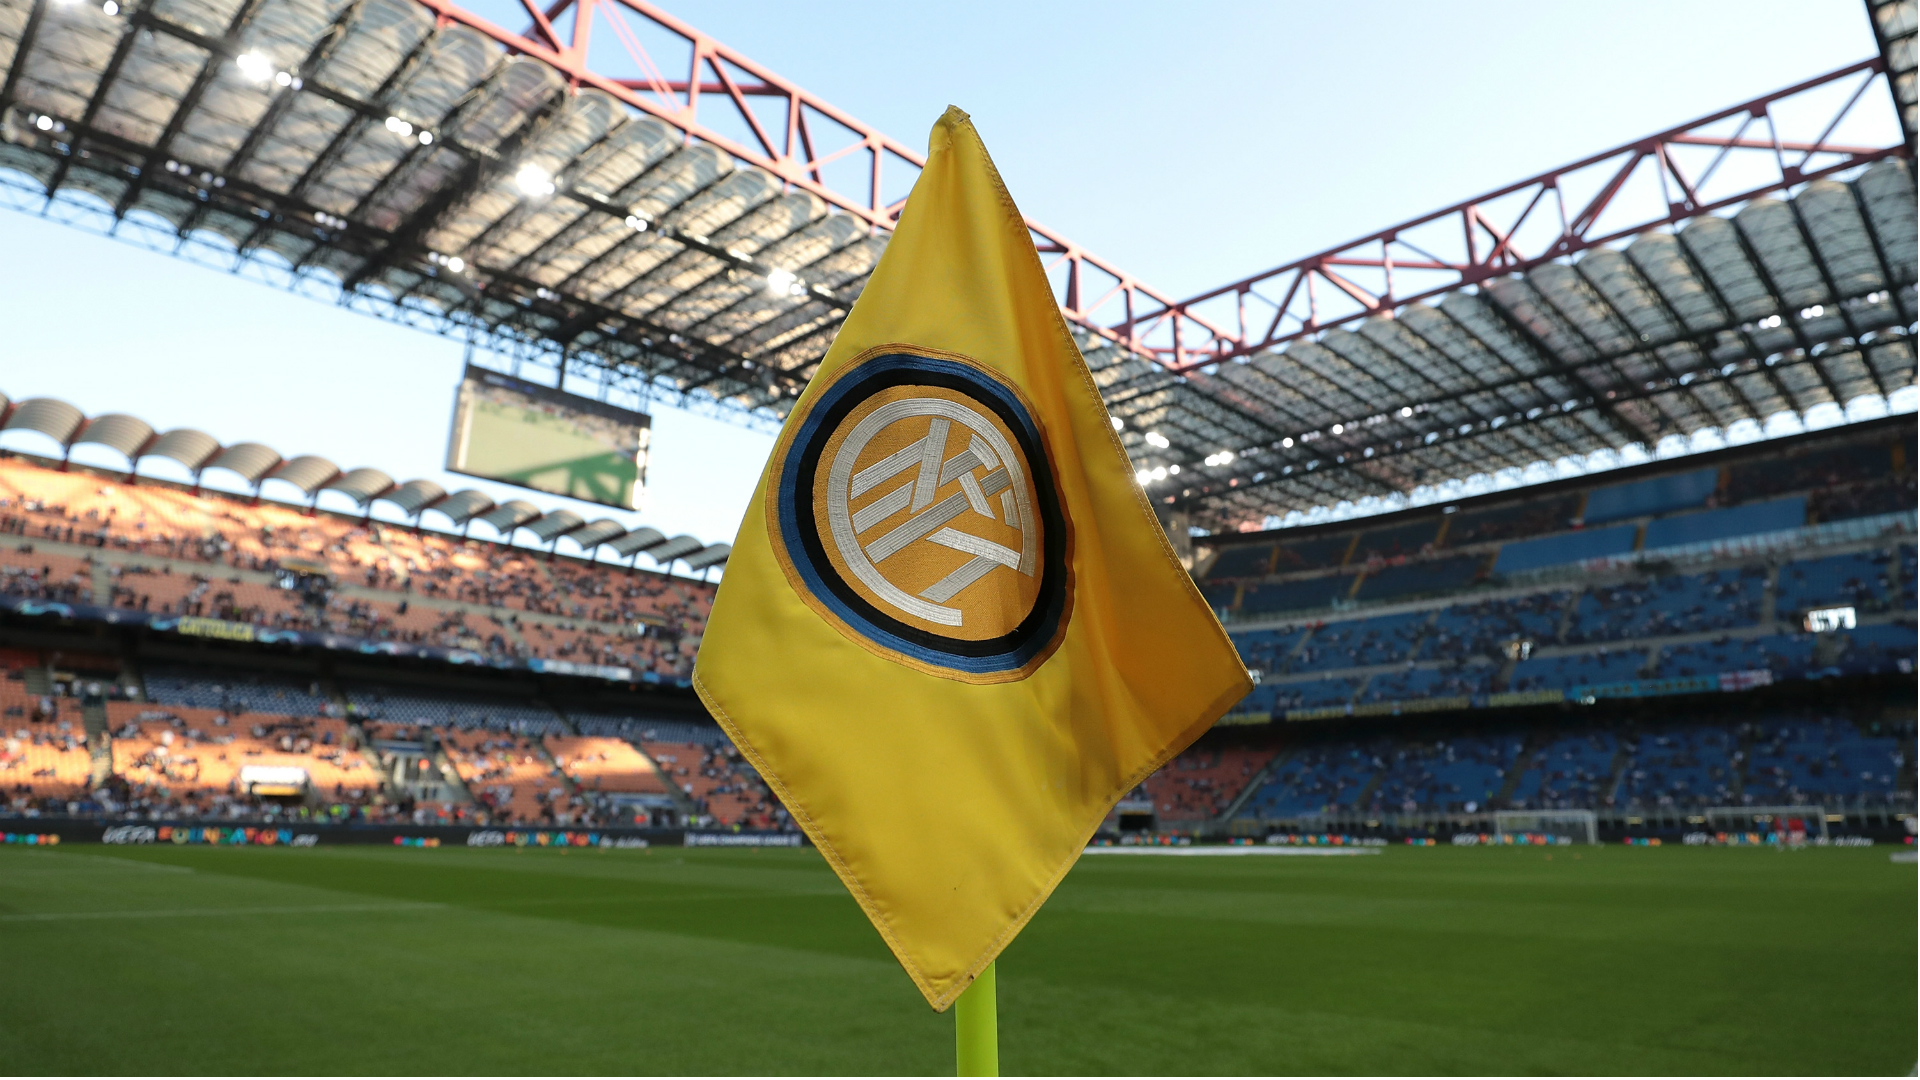 Inter's Serie A match on Sunday was postponed due to the coronavirus, causing concern for Europa League opponents Ludogorets.